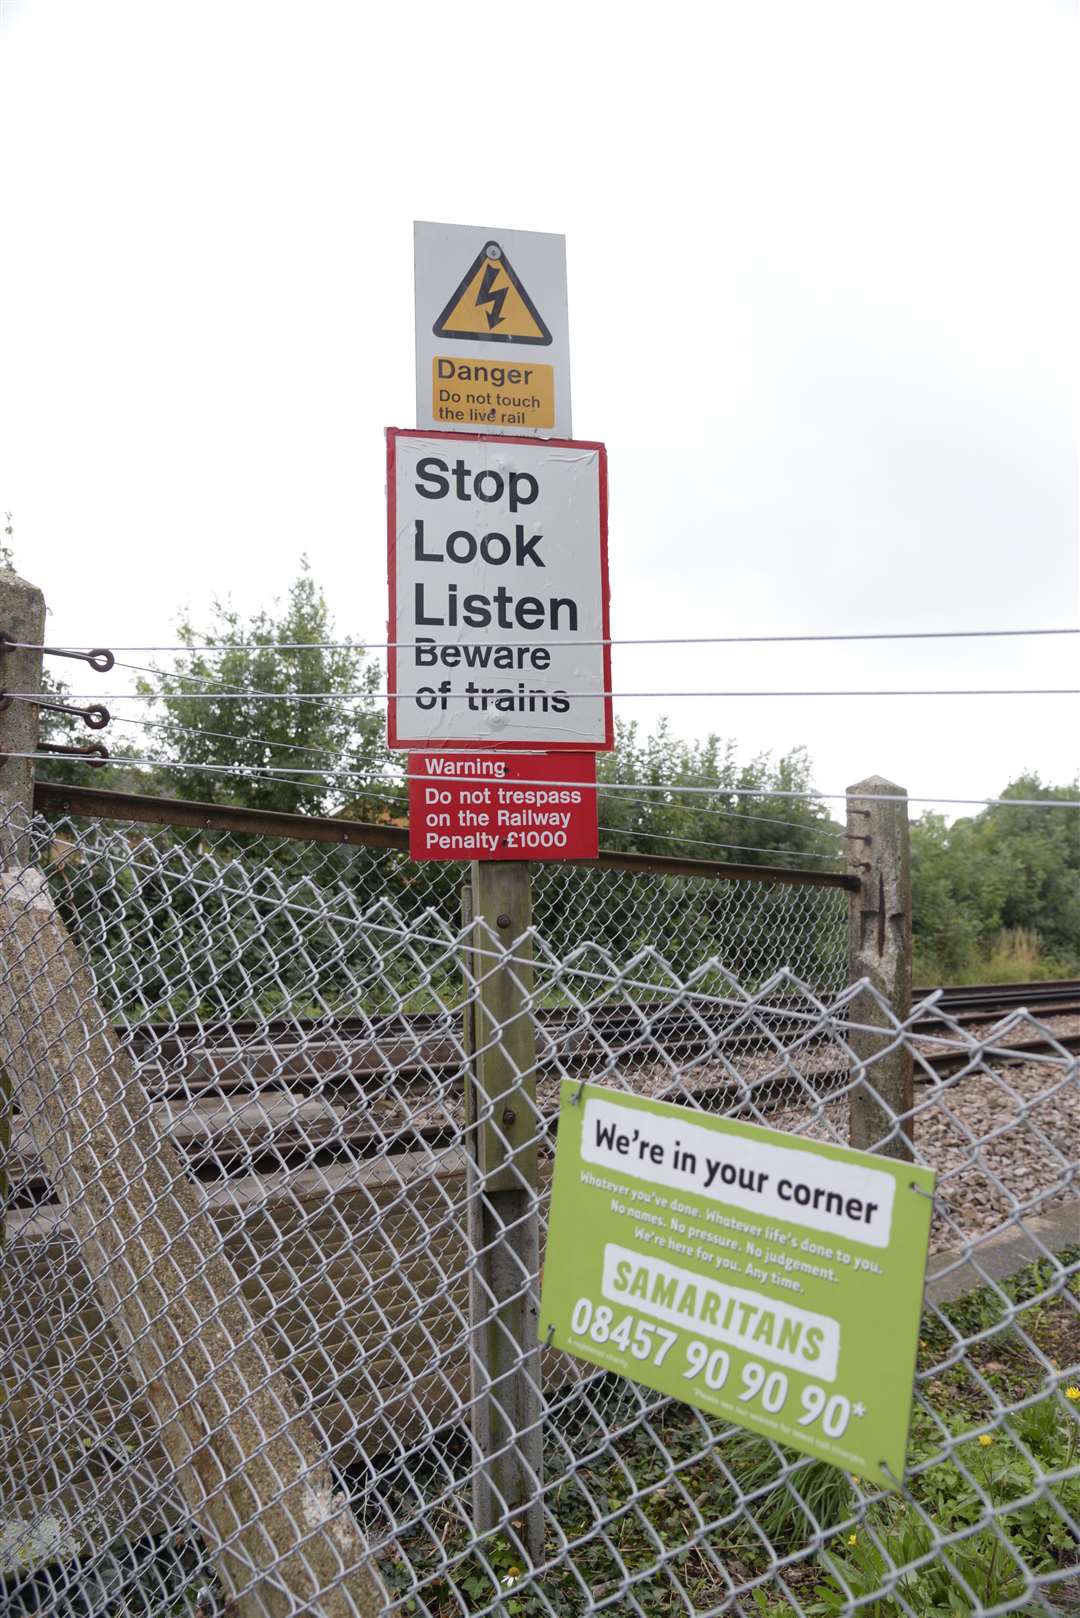 Network Rail faces criticism over safety at the crossing